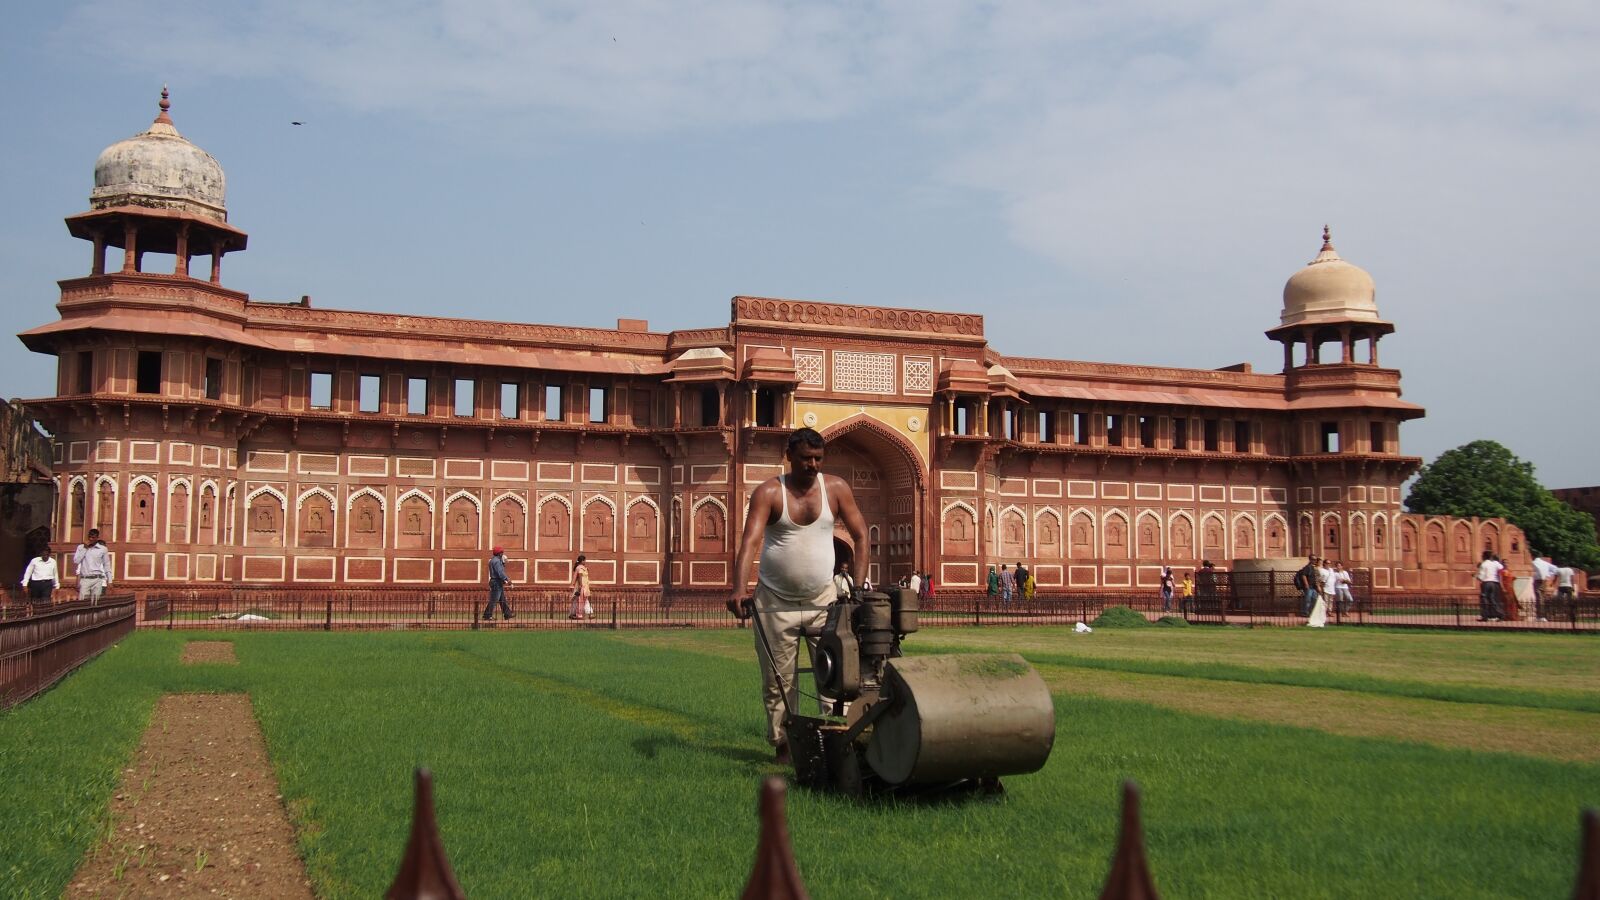 Olympus PEN E-PM2 sample photo. Agra fort, red building photography